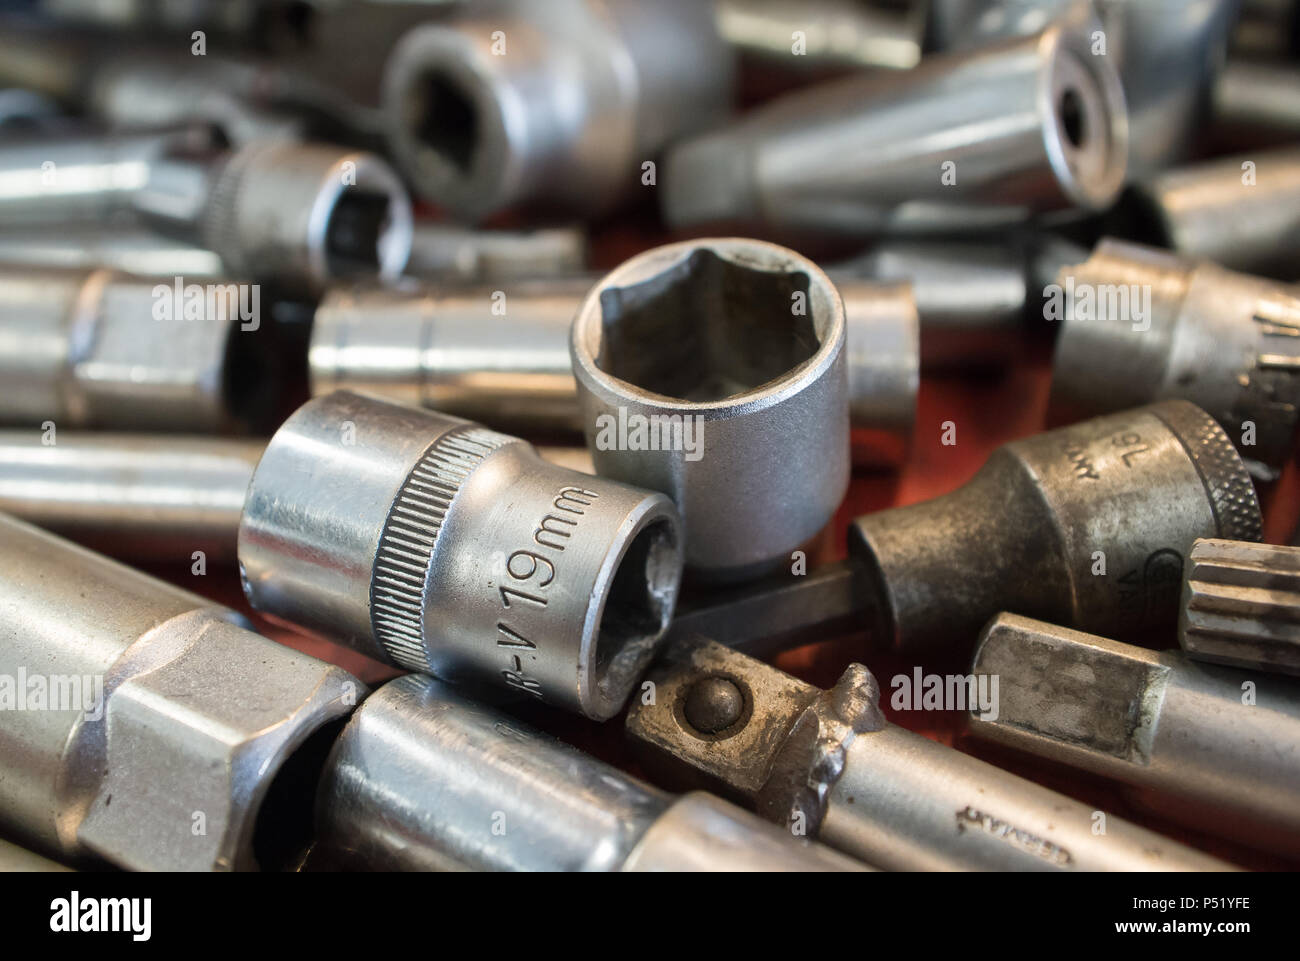 Spanner and nuts in a garage Stock Photo